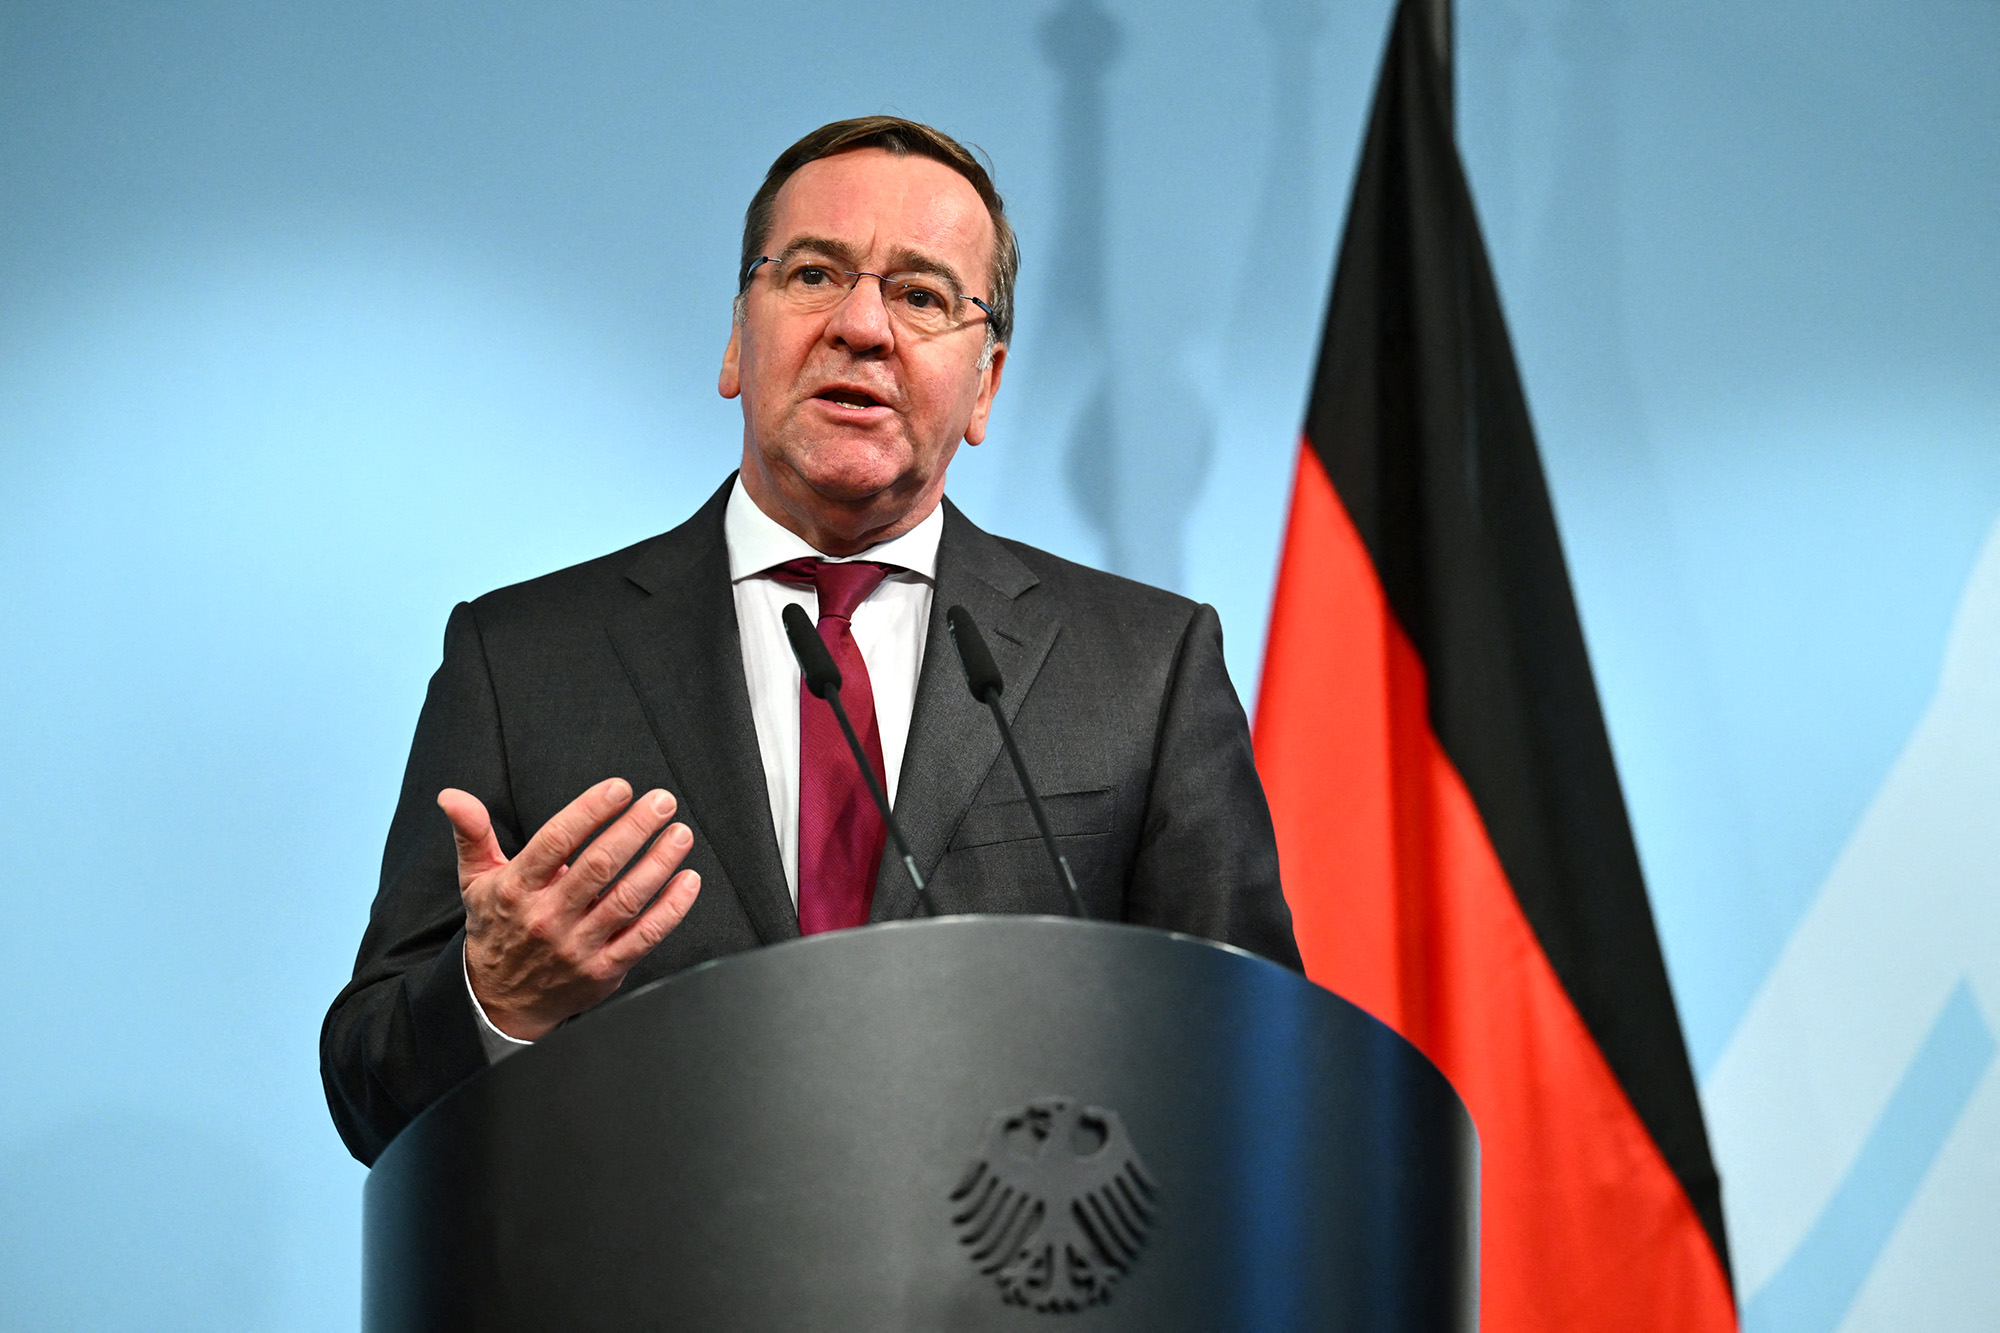 German Defence Minister Boris Pistorius speaks during a joint news conference at the Defence Ministry in Berlin, Germany, on January 24.